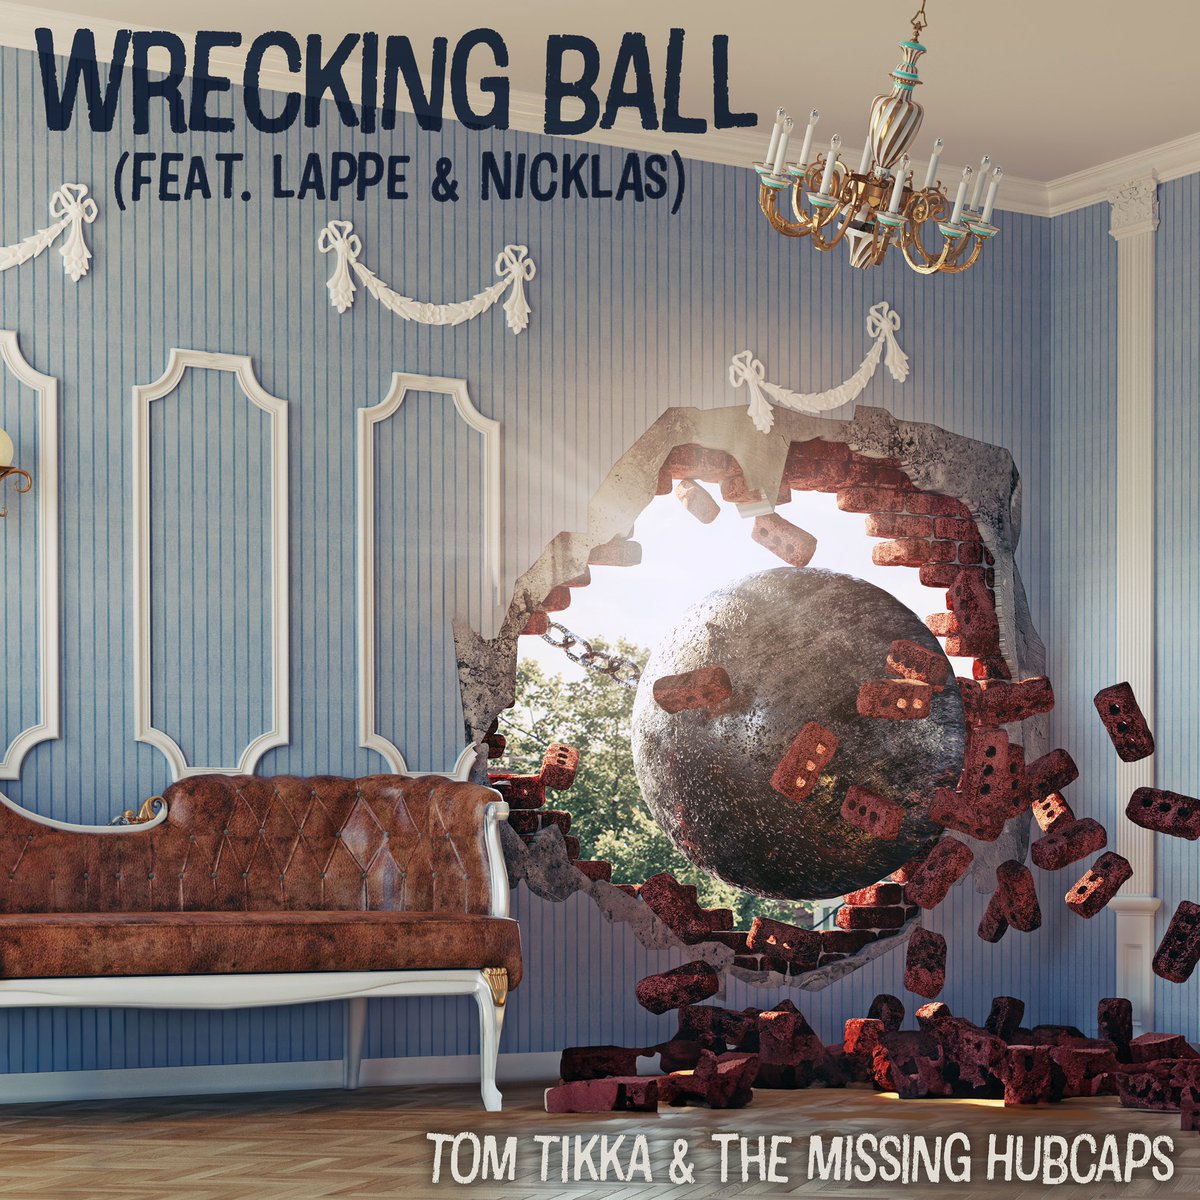 'Wrecking Ball' will come out on May 10. Here's a small teaser for those who want to check it out. soundcloud.com/tomtikka/wreck… @OneMediaiP @OfficialMBTM #carmengray #rock #rockmusic #newmusic #newmusicalert